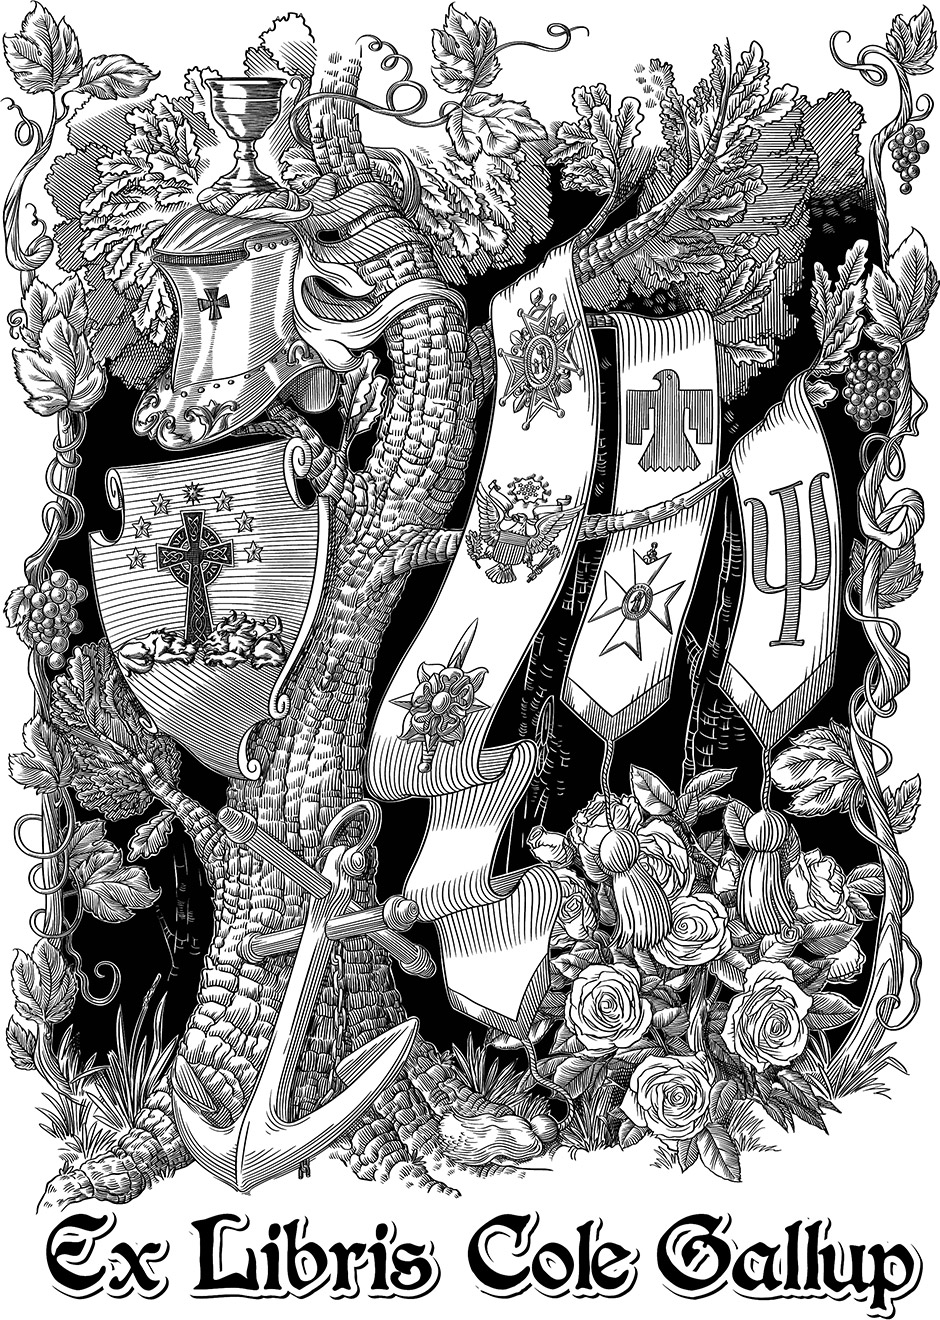 Coat of Arms of Cole Gallup 12